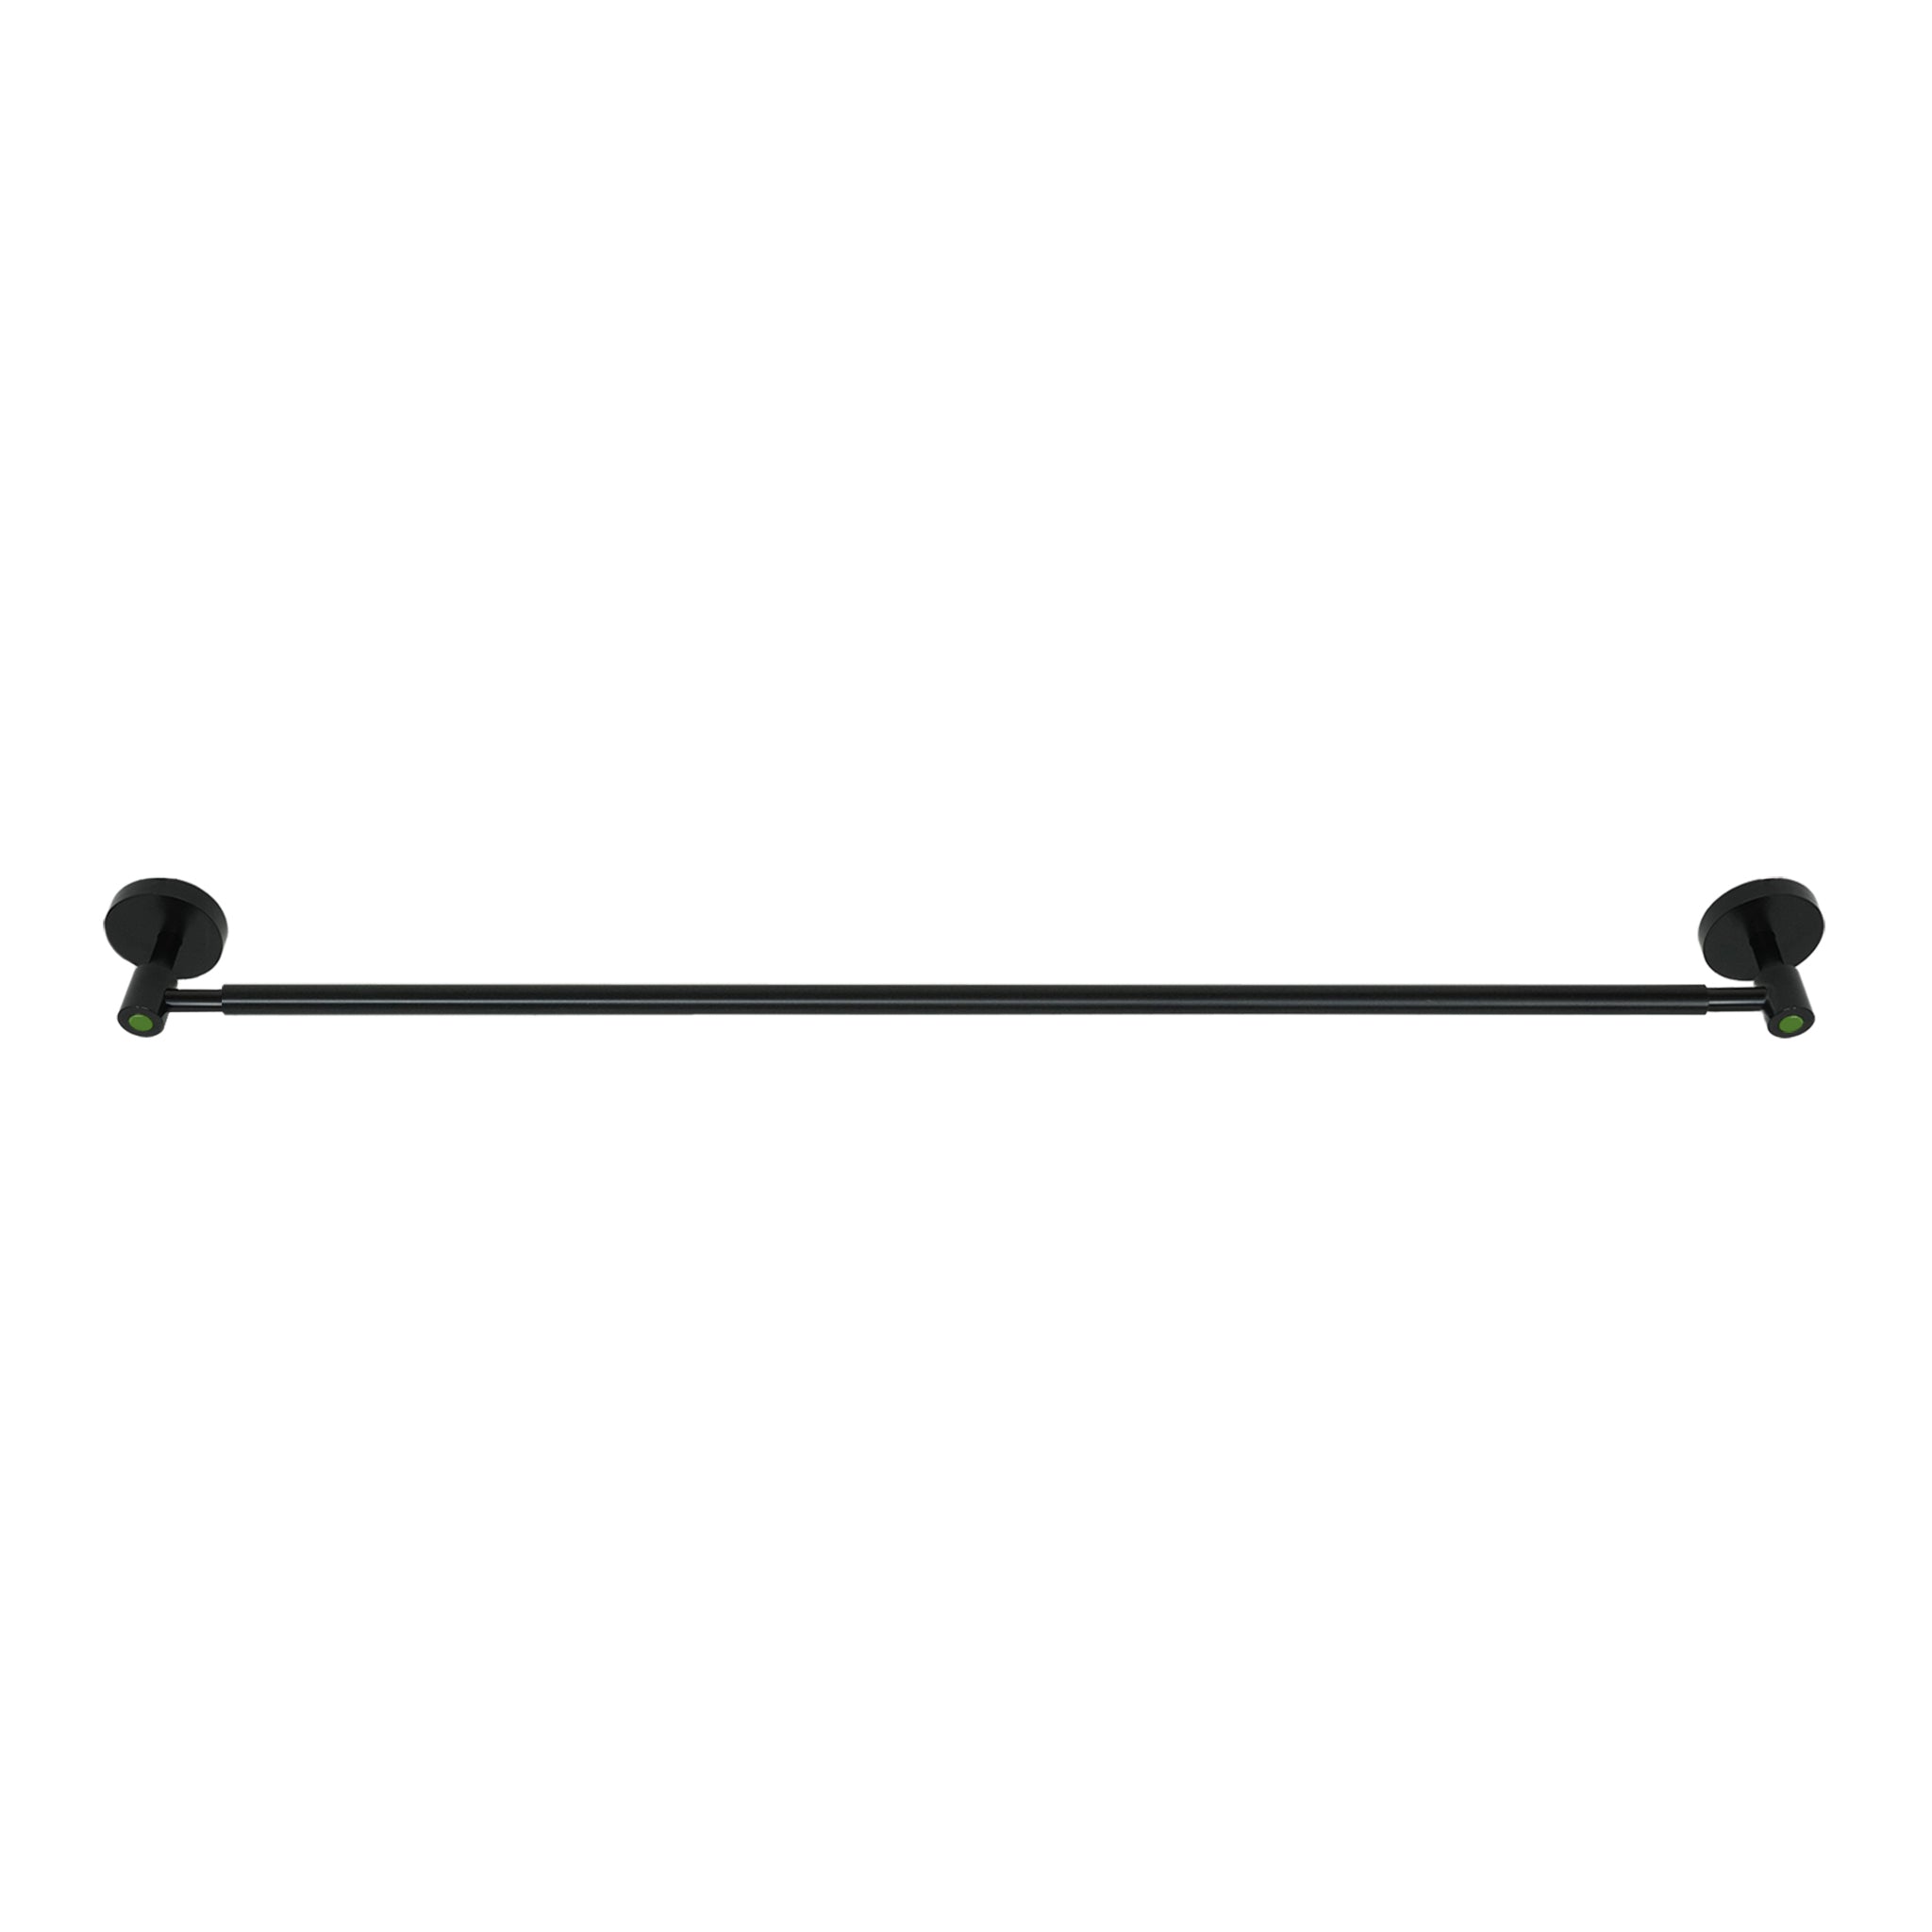 Black and python green color Head towel bar 24" Dutton Brown hardware